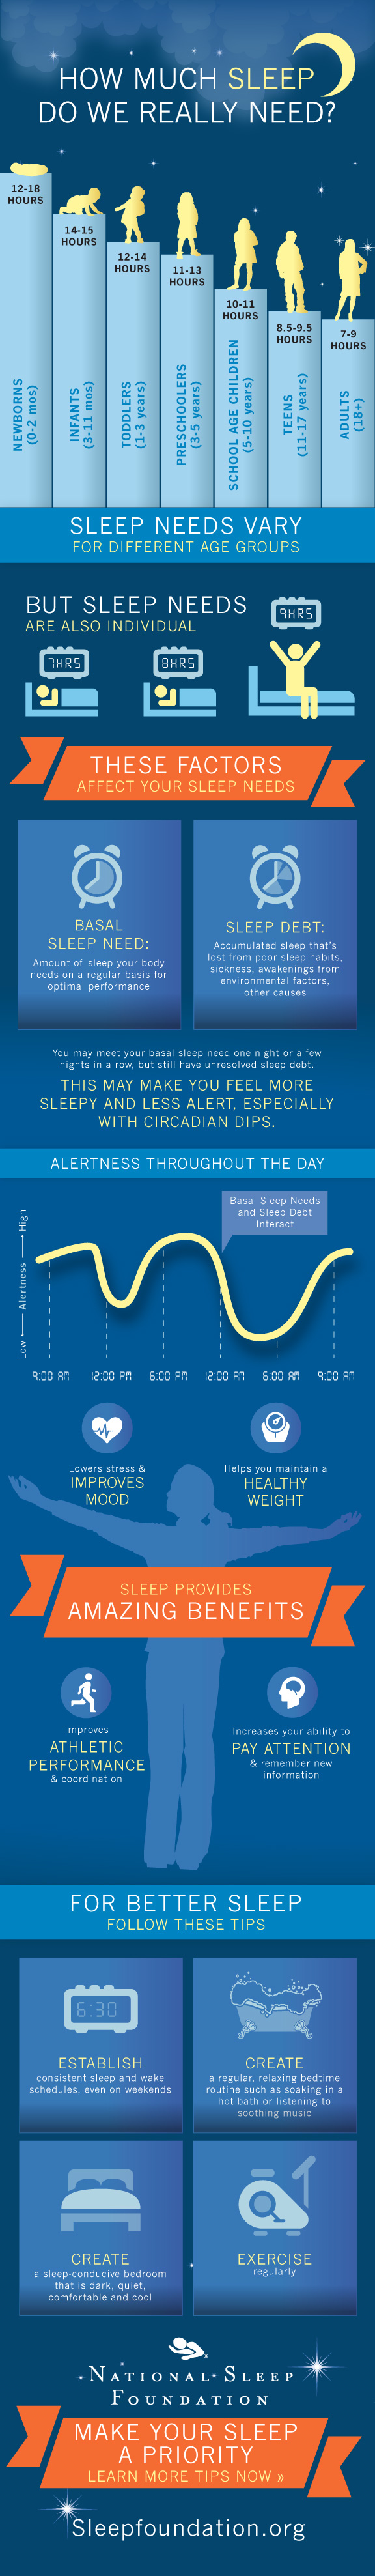 how-much-sleep-do-we-really-need-infographic